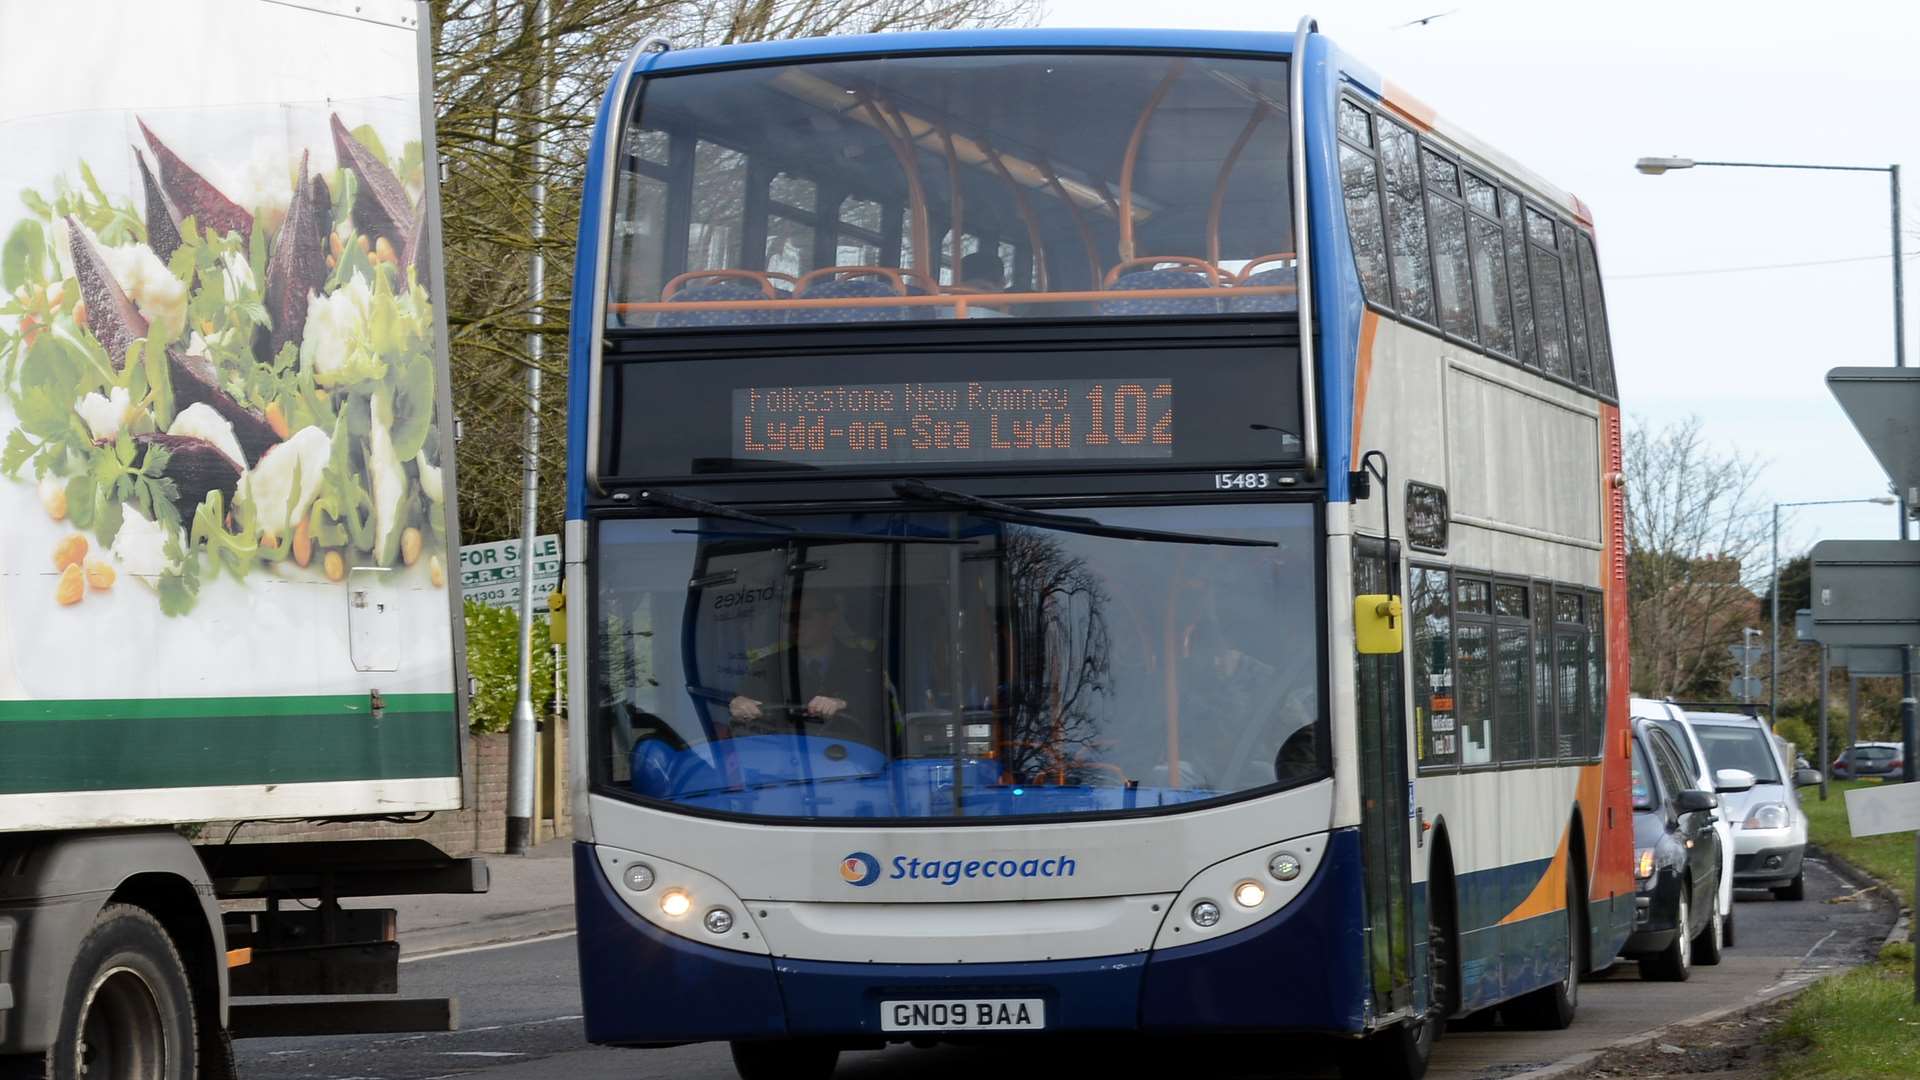 Many bus services in Kent could be under threat